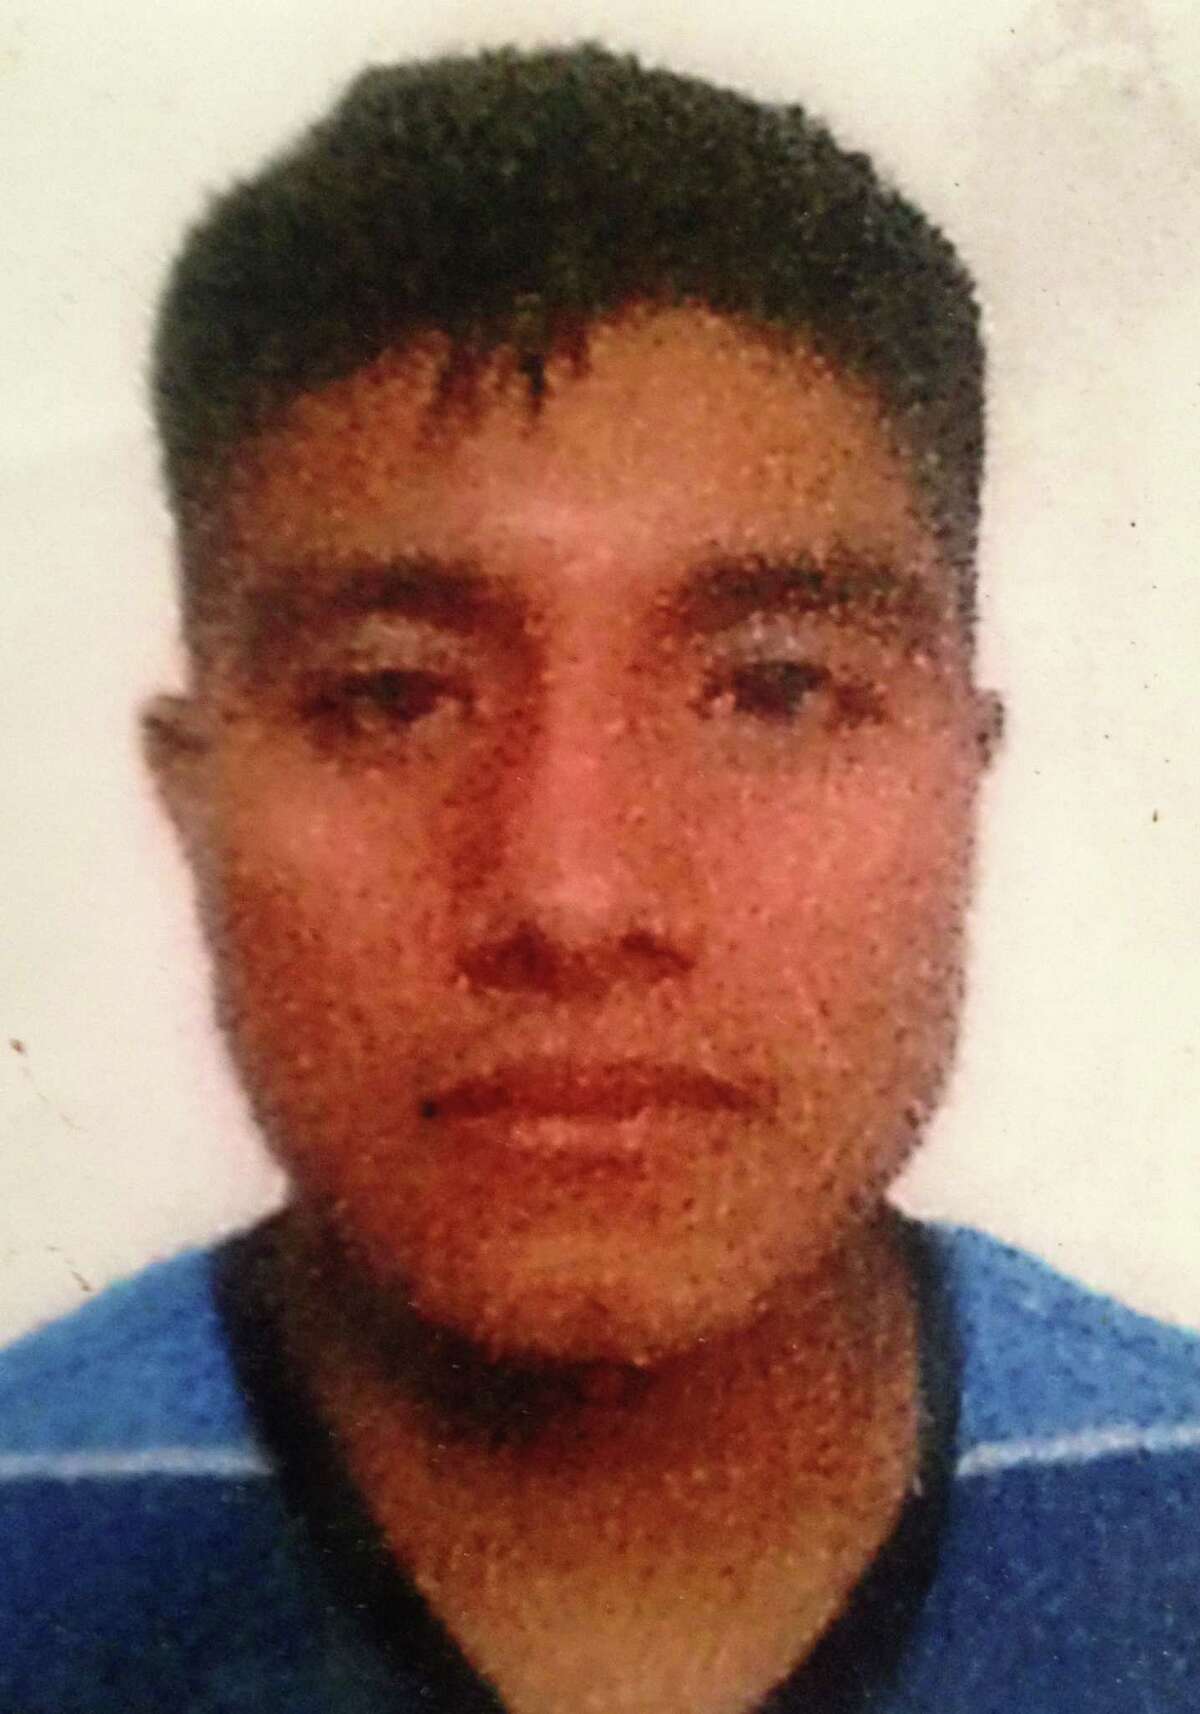 Miguel Marcial Bautista,17, who was killed on July 21, 2013, as he rode a bicycle down Richmond Avenue in the early morning hours. The alleged motorist was later arrested by police and is charged with failing to stop and render aid. Marcial, a native of Mexico, had been in Houston for three weeks, and was working as a dishwasher. The photo is from his family.